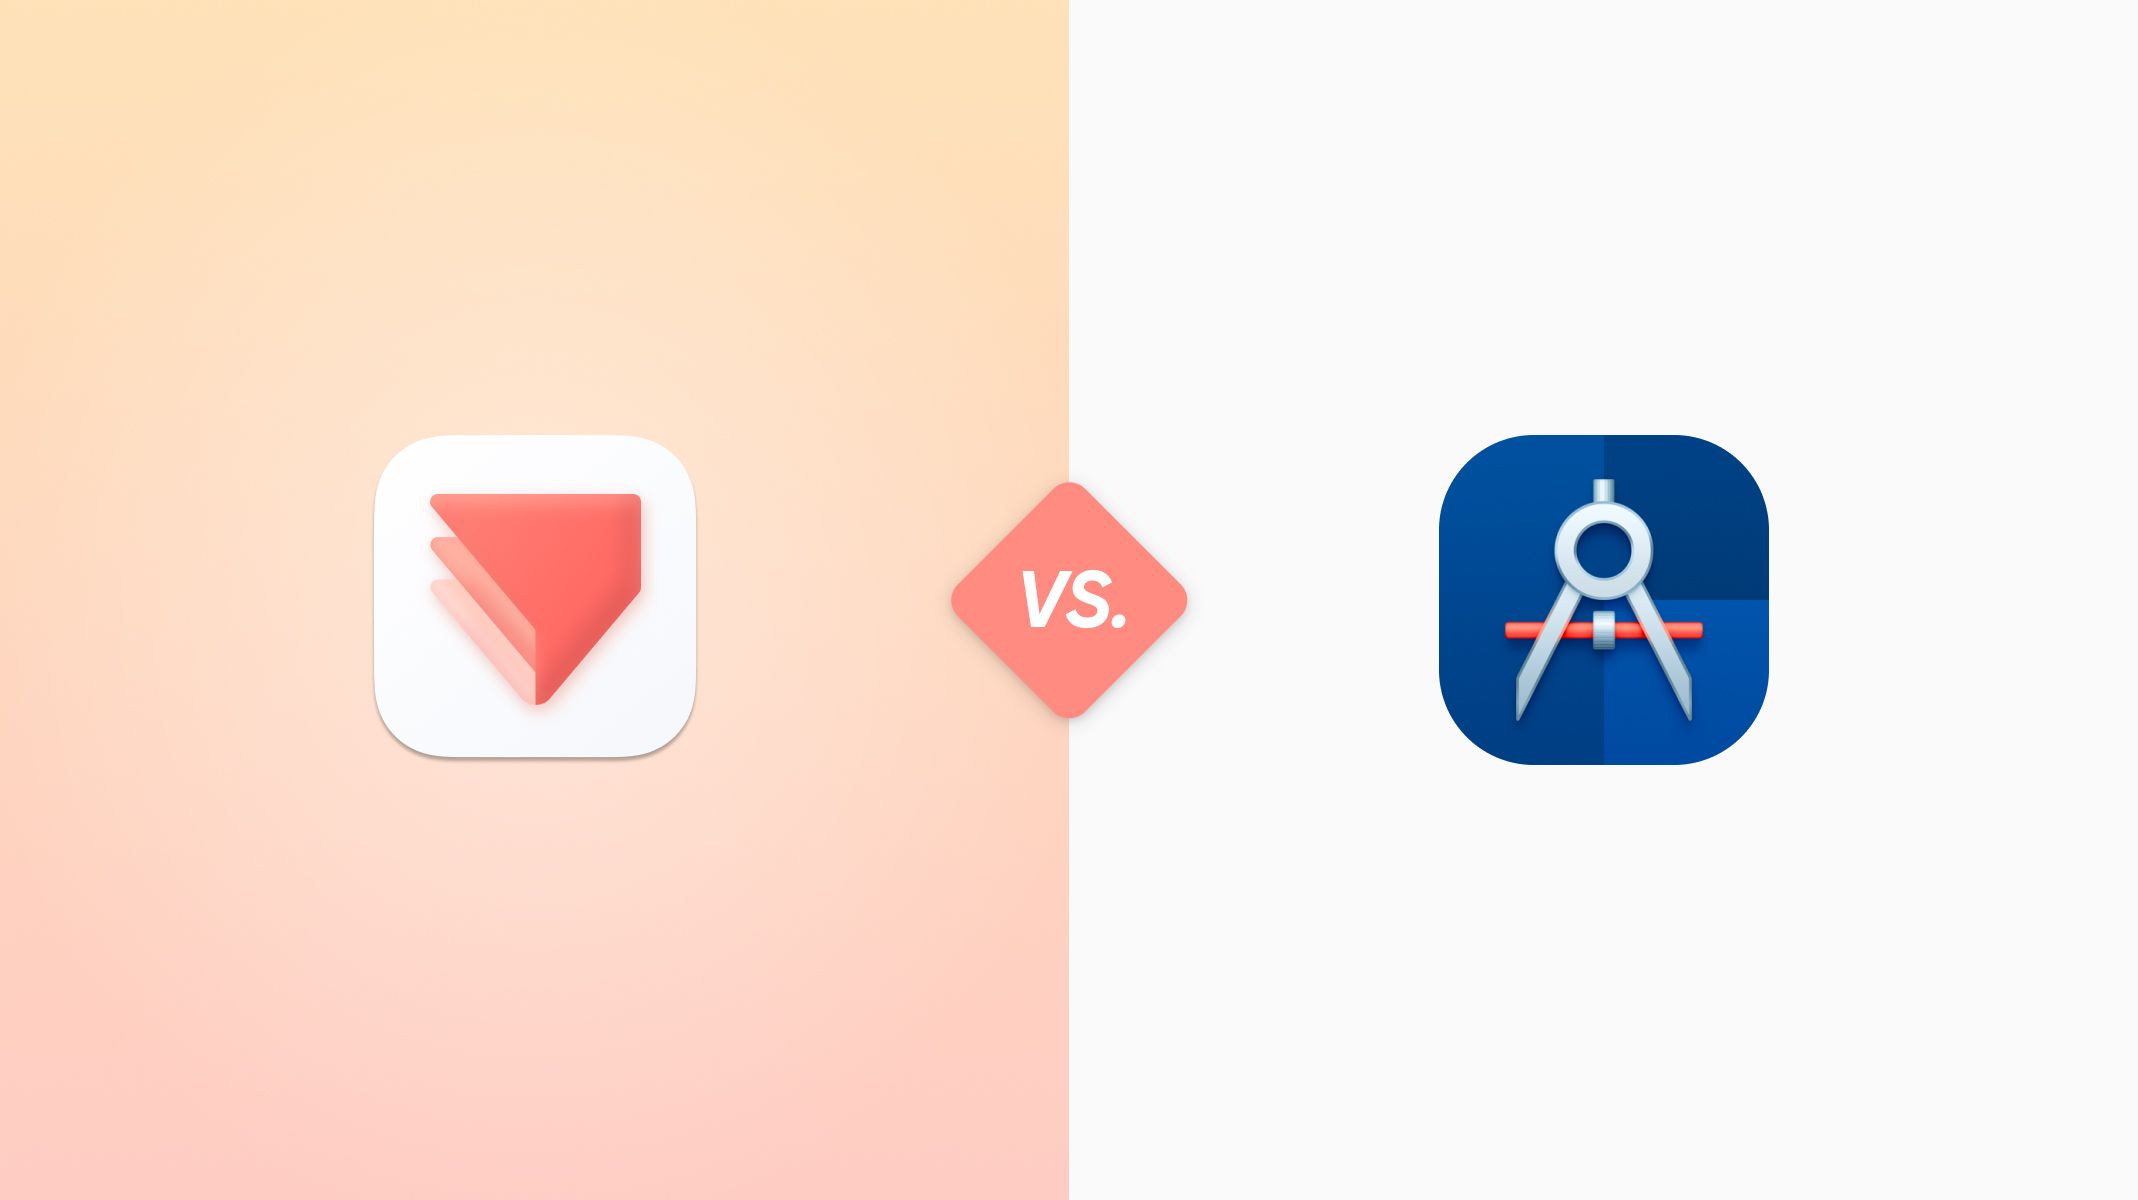 ProtoPie vs Flinto: Which Is the Best Prototyping Tool on the Market?